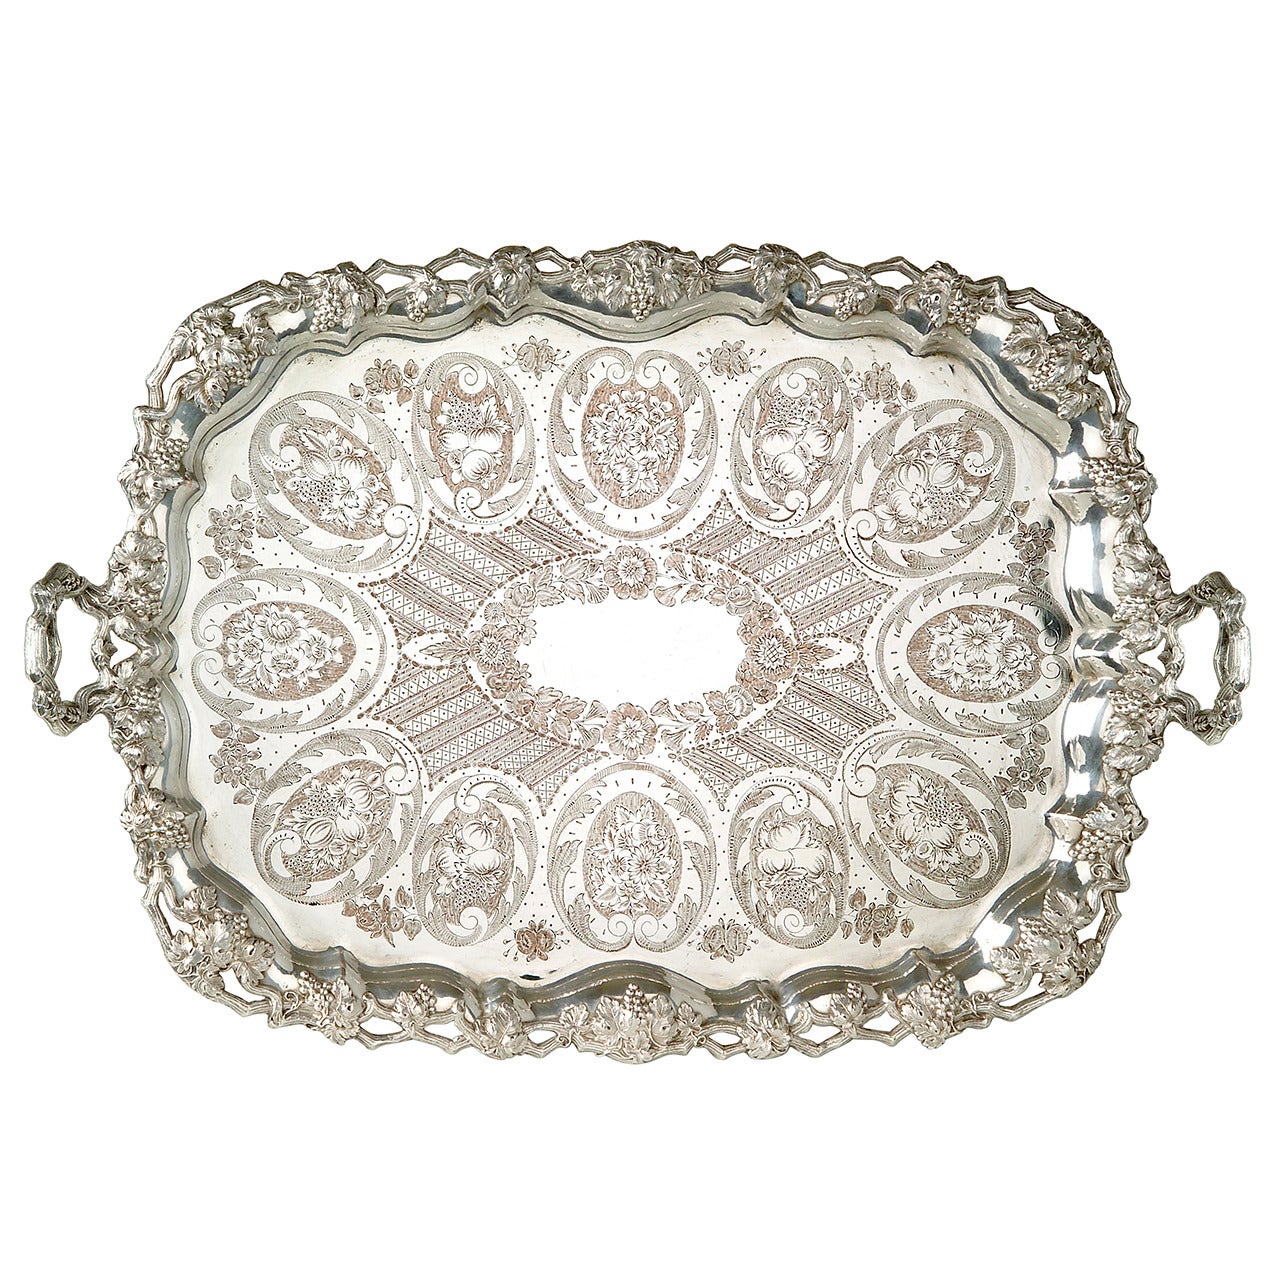 A large engraved silver plated tray with silver garnitures by Jean-Joseph Micaud For Sale